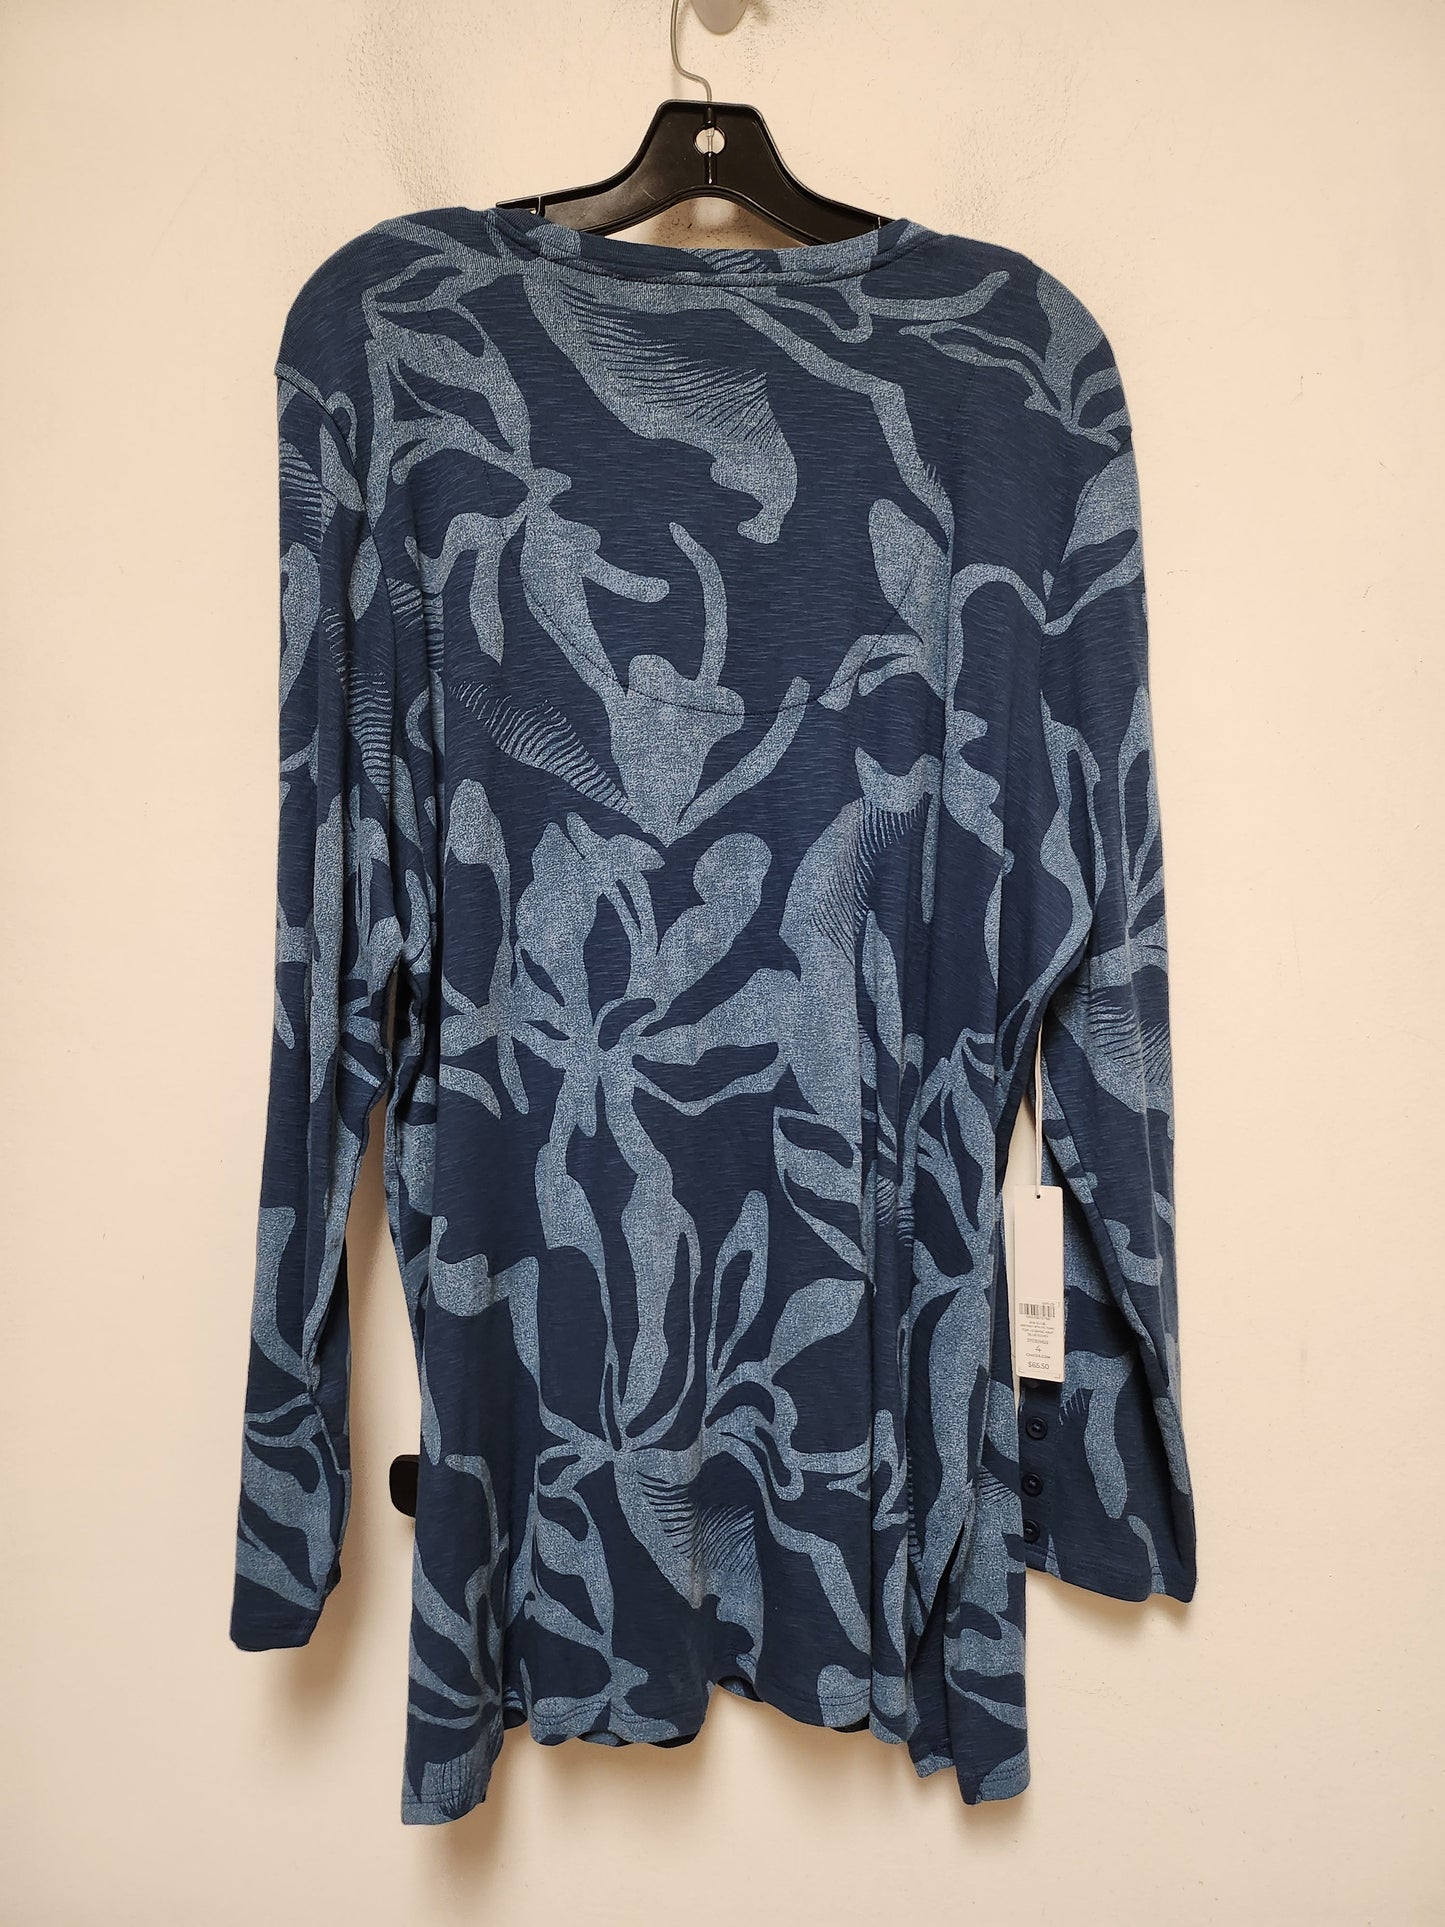 Blue Top Long Sleeve Chicos, Size Xxl